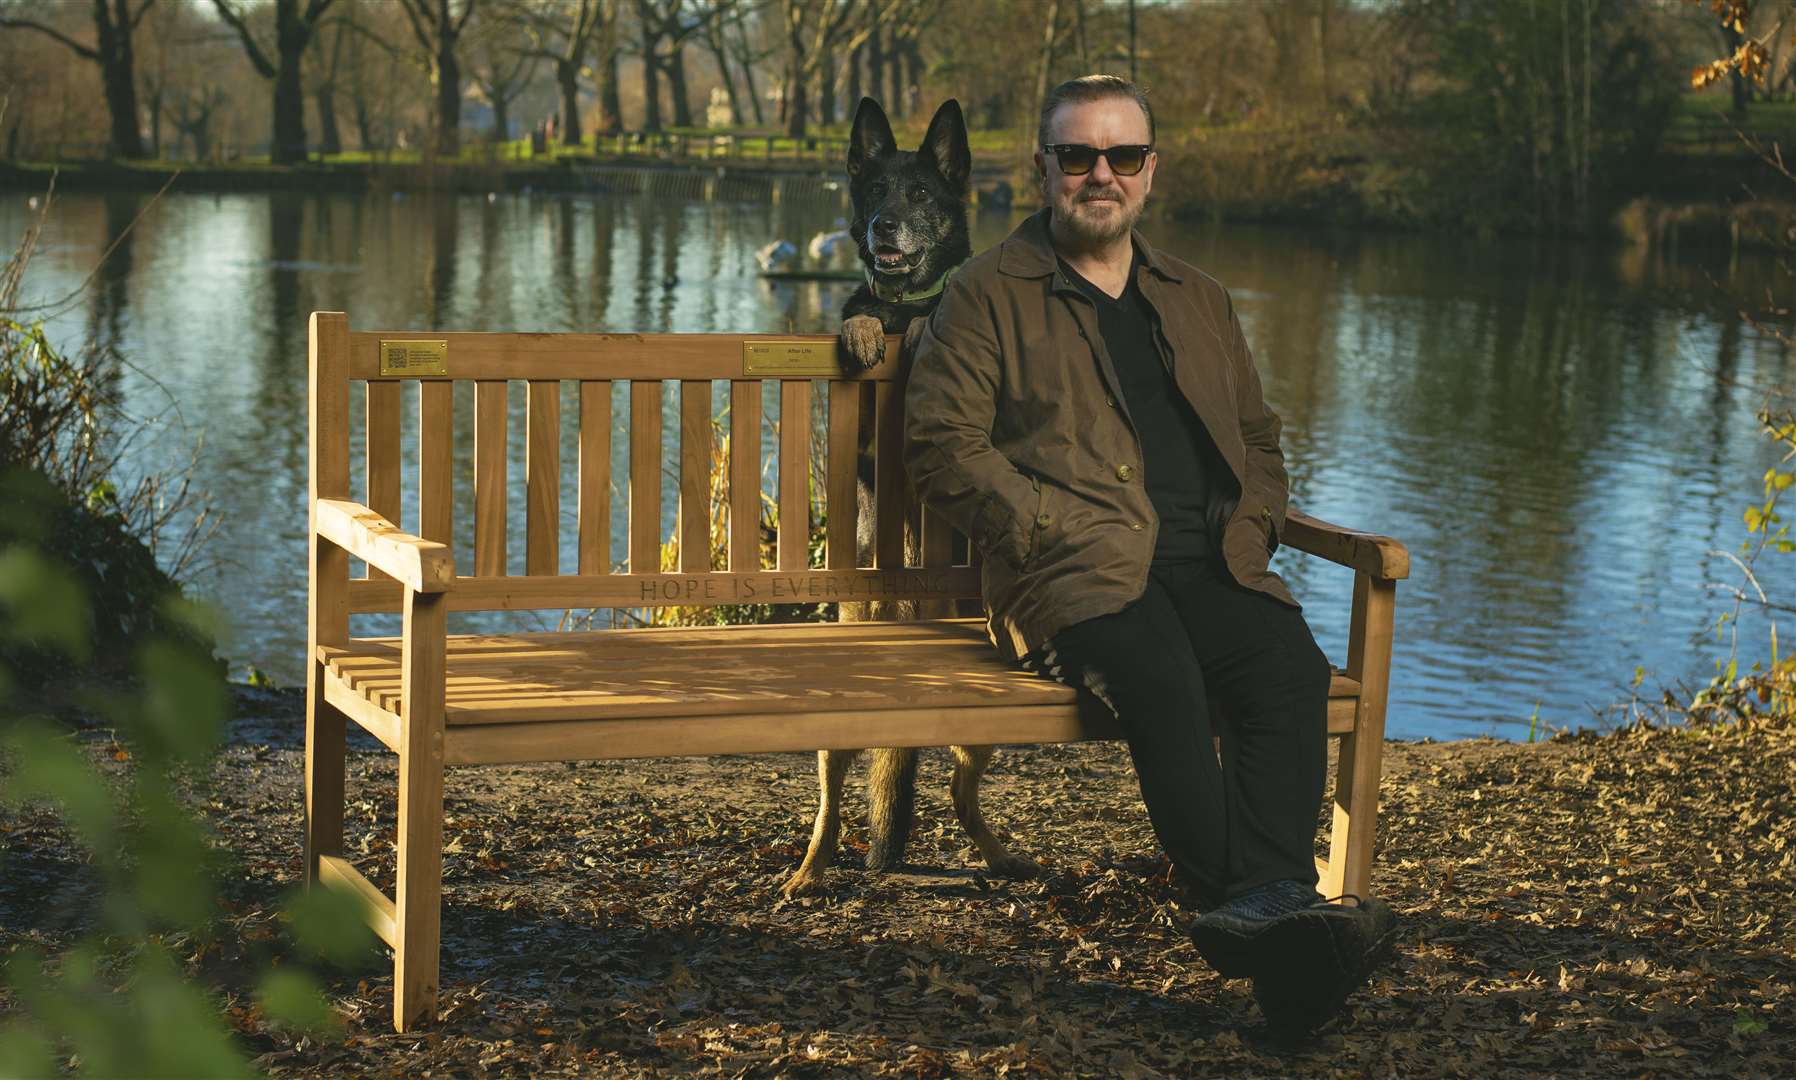 A new bench will be installed in Victoria Park, Ashford, to coincide with the release of After Life series three. Picture: Netflix